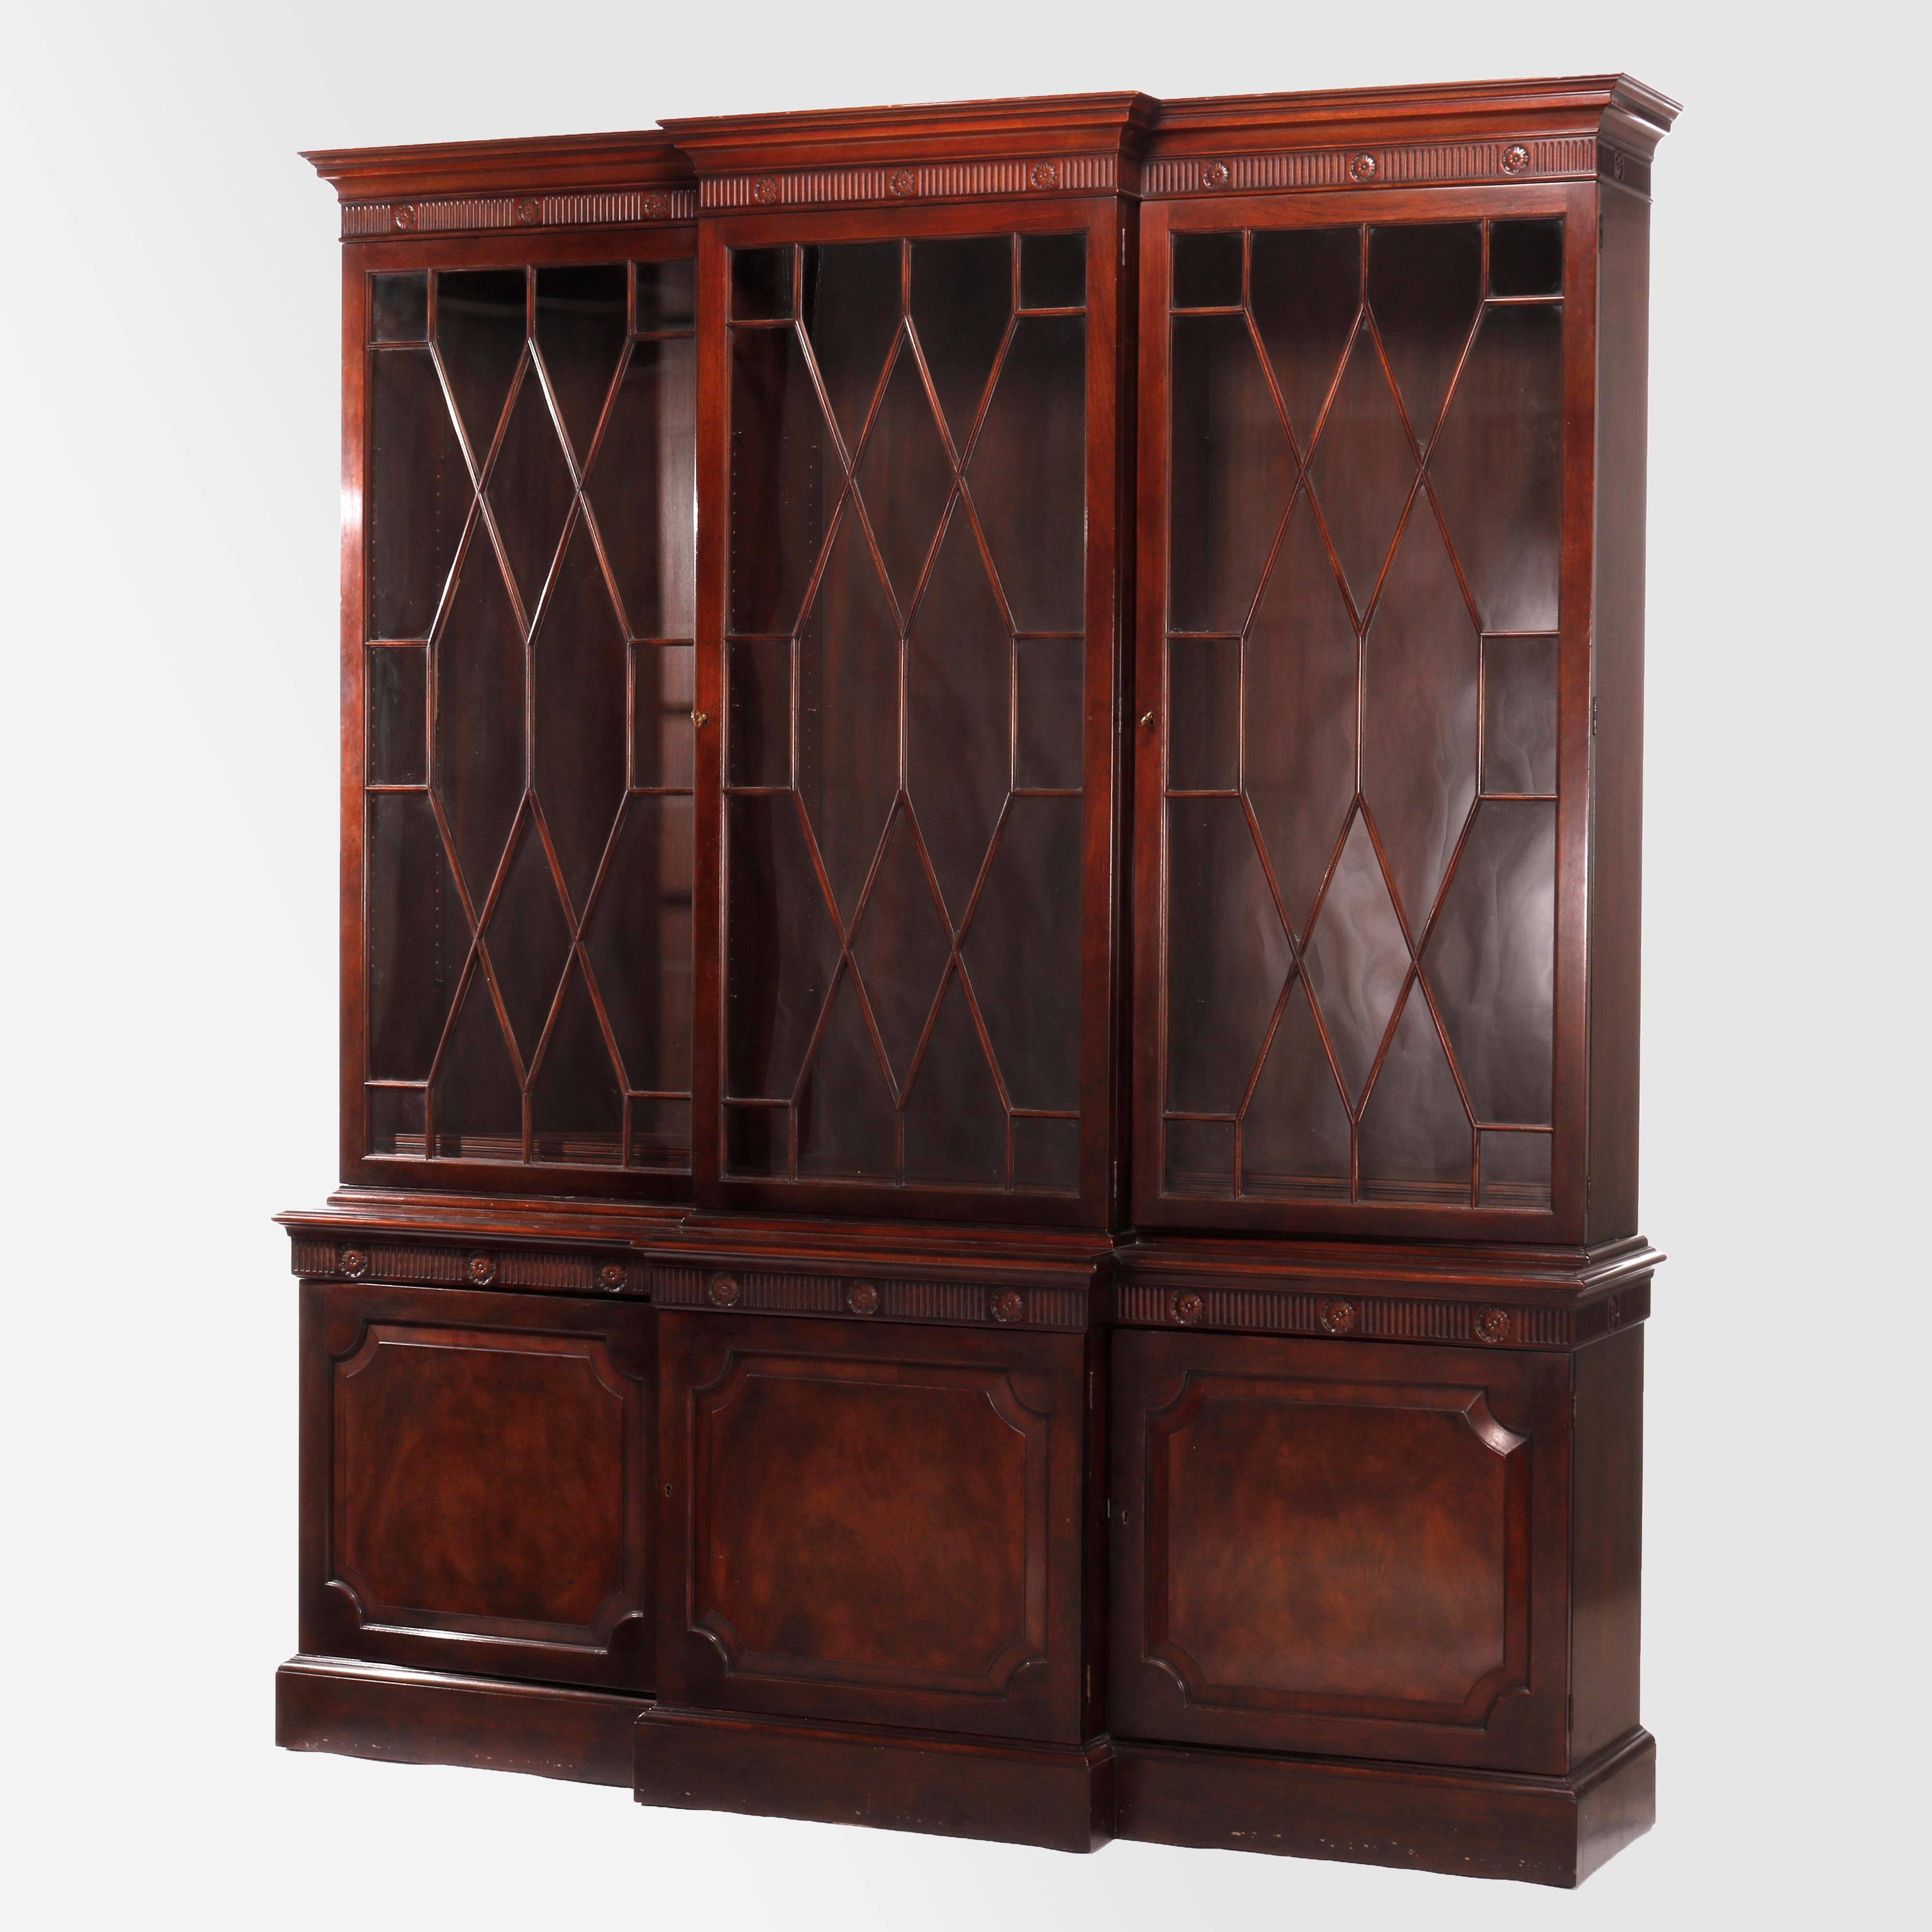 A step-back breakfront cupboard by Baker Furniture offers flame mahogany construction with triple mullioned glass doors opening to adjustable shelf and divided interior over lower cabinet with blind doors having flame mahogany reserves, reeded trim